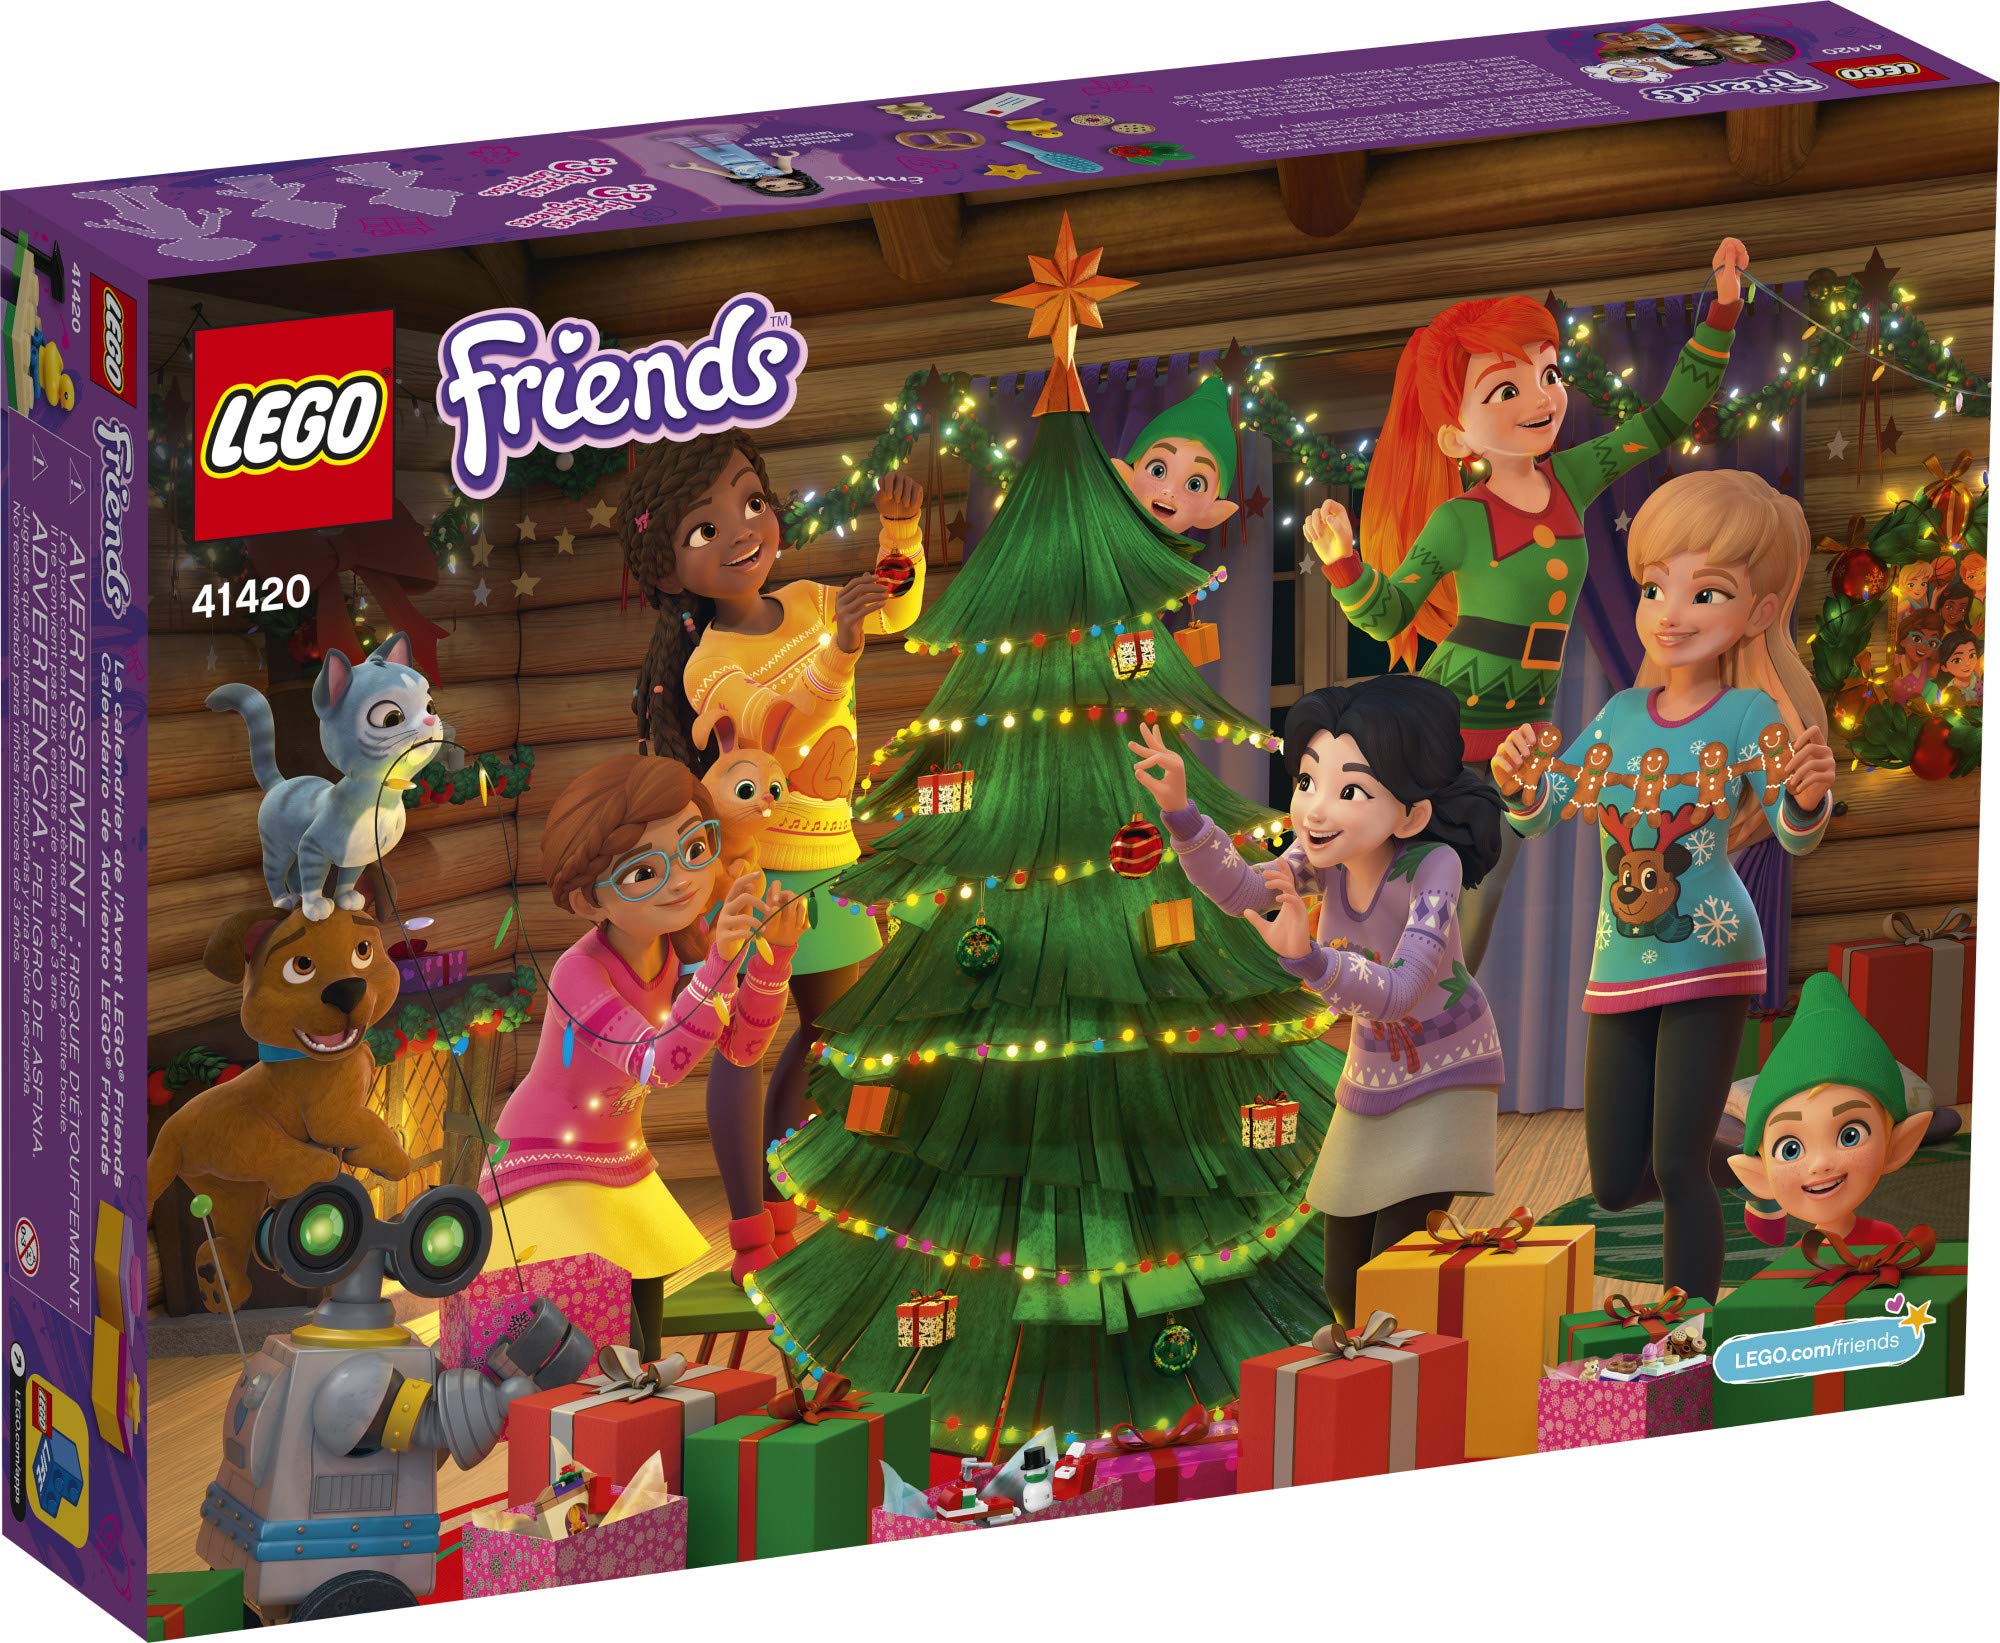 LEGO Friends 2020 Advent Calendar 41420, Kids Advent Calendar with toys; makes a great holiday treat for children who love toy Advent Calendars and buildable figures (236 Pieces)